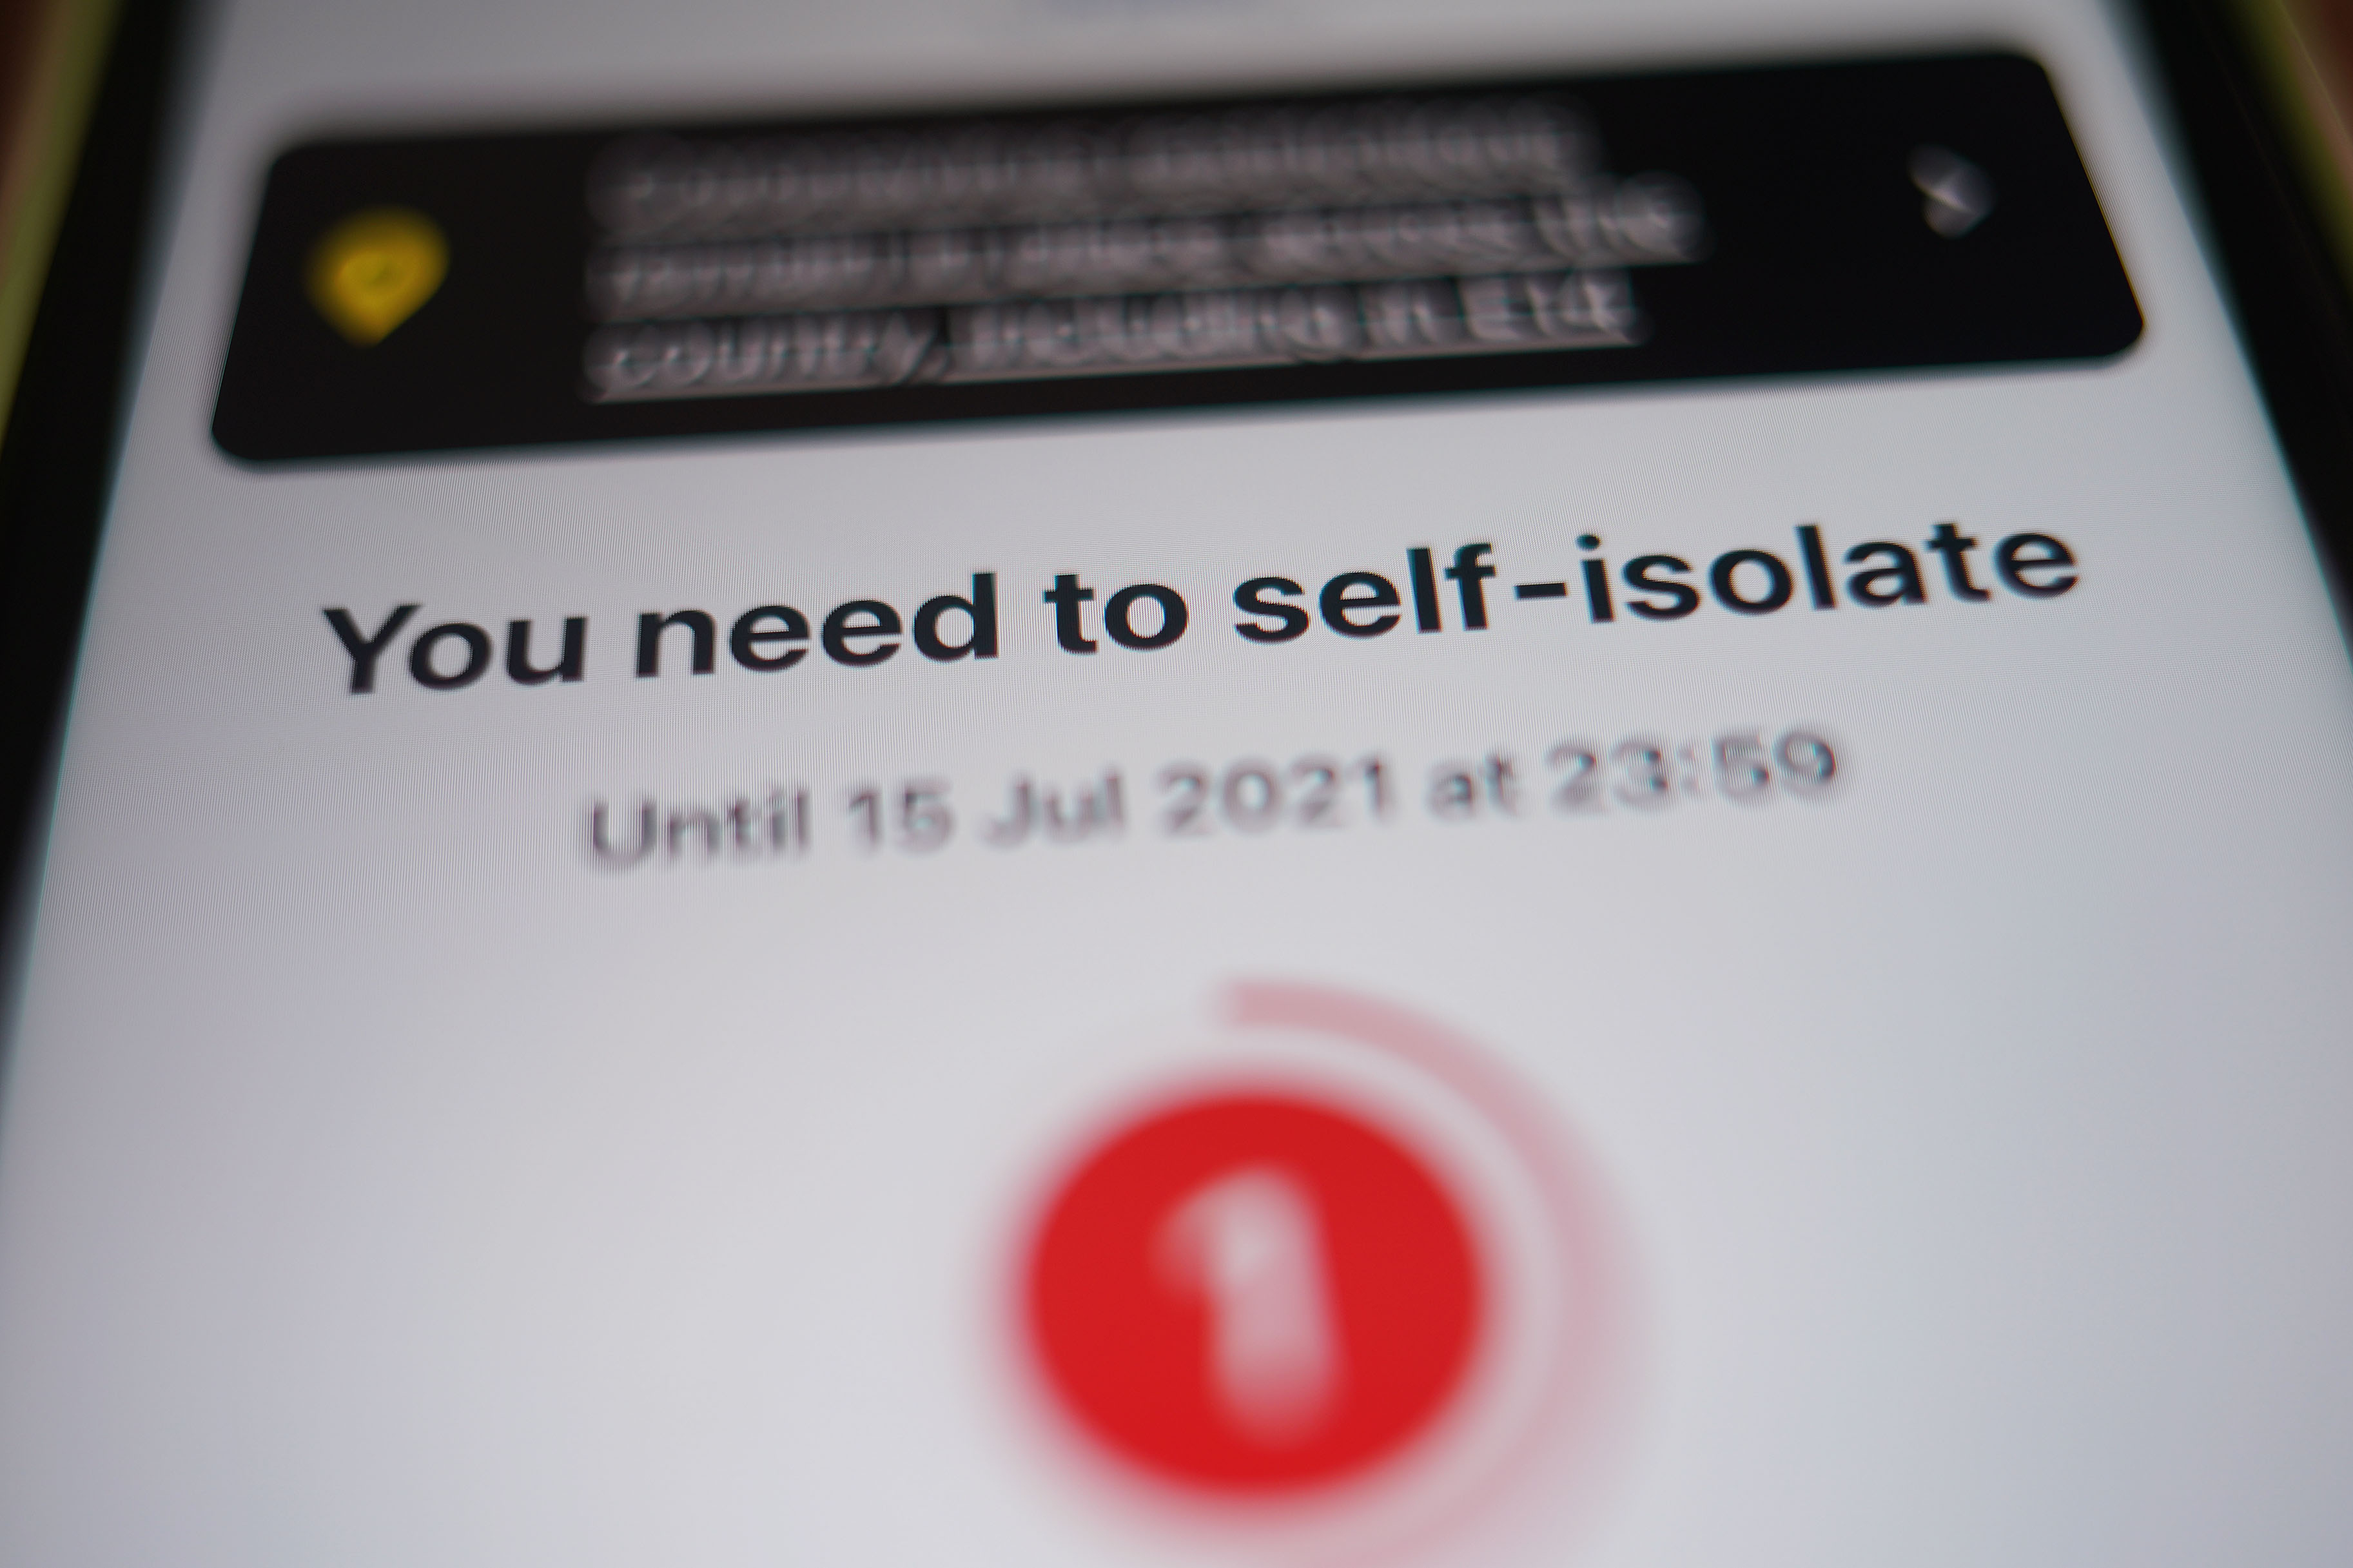 NHS app self-isolate message